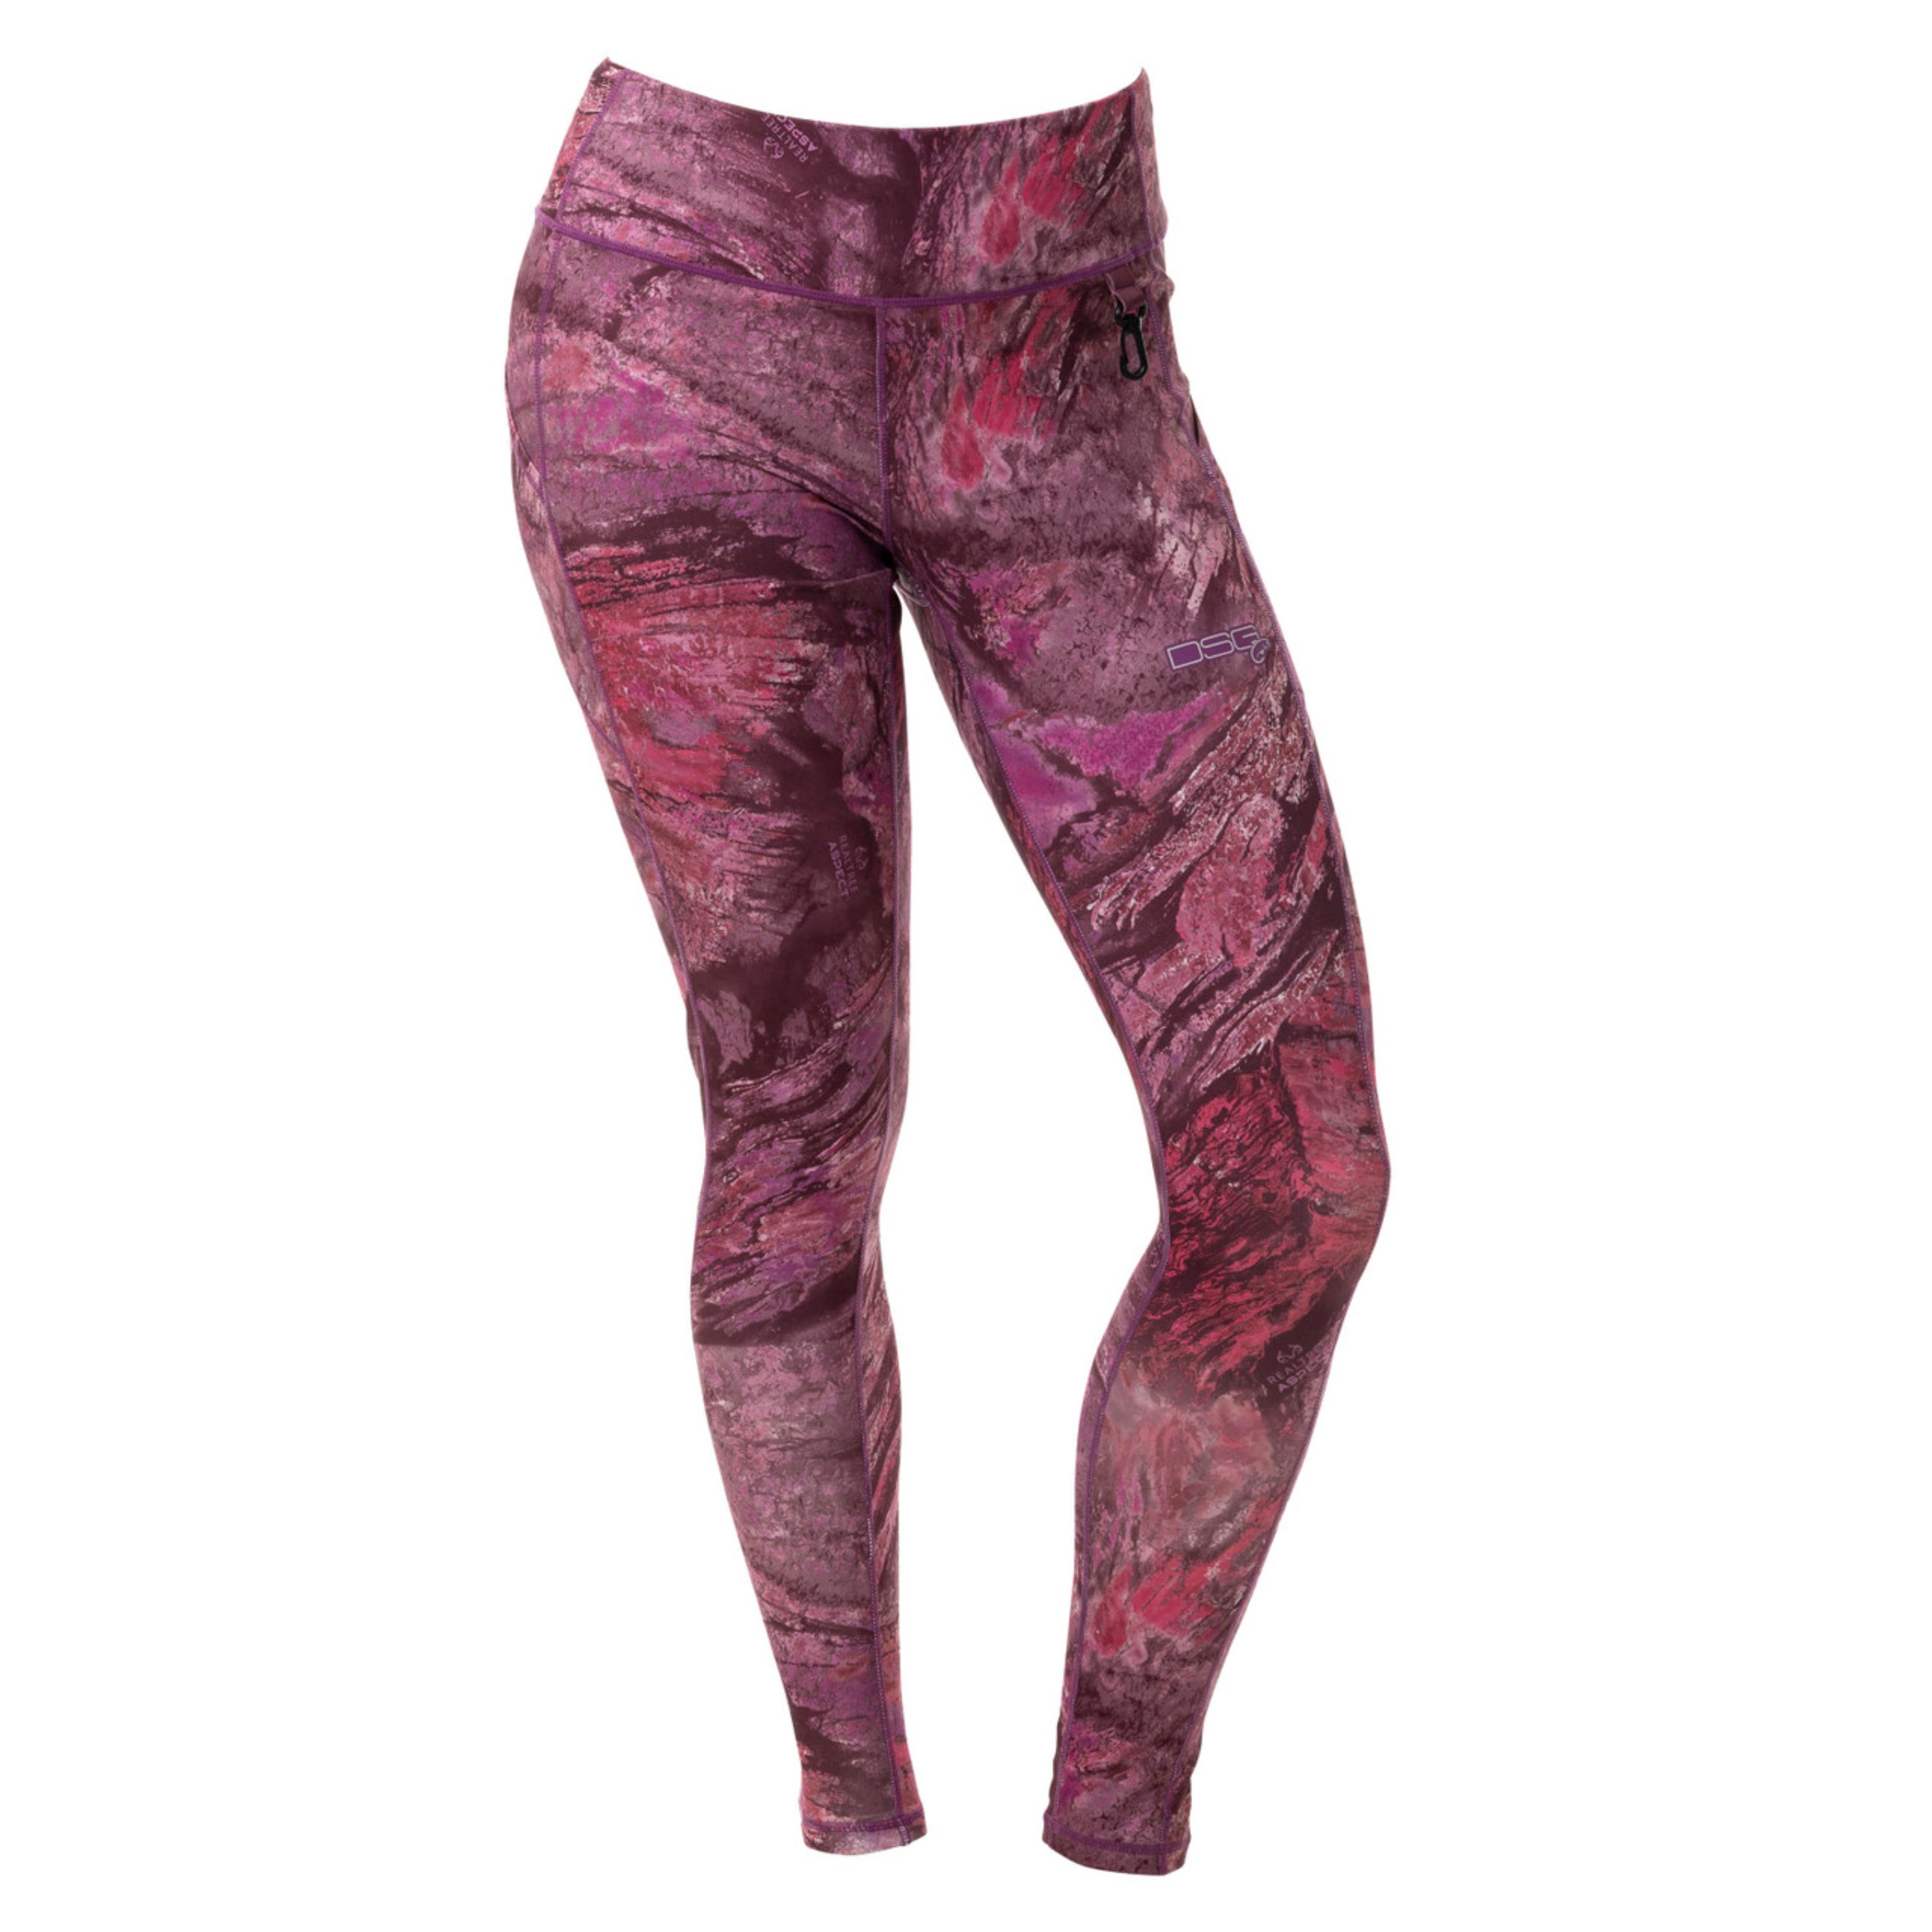 Leggings That Don't Fall Down Detector  International Society of Precision  Agriculture